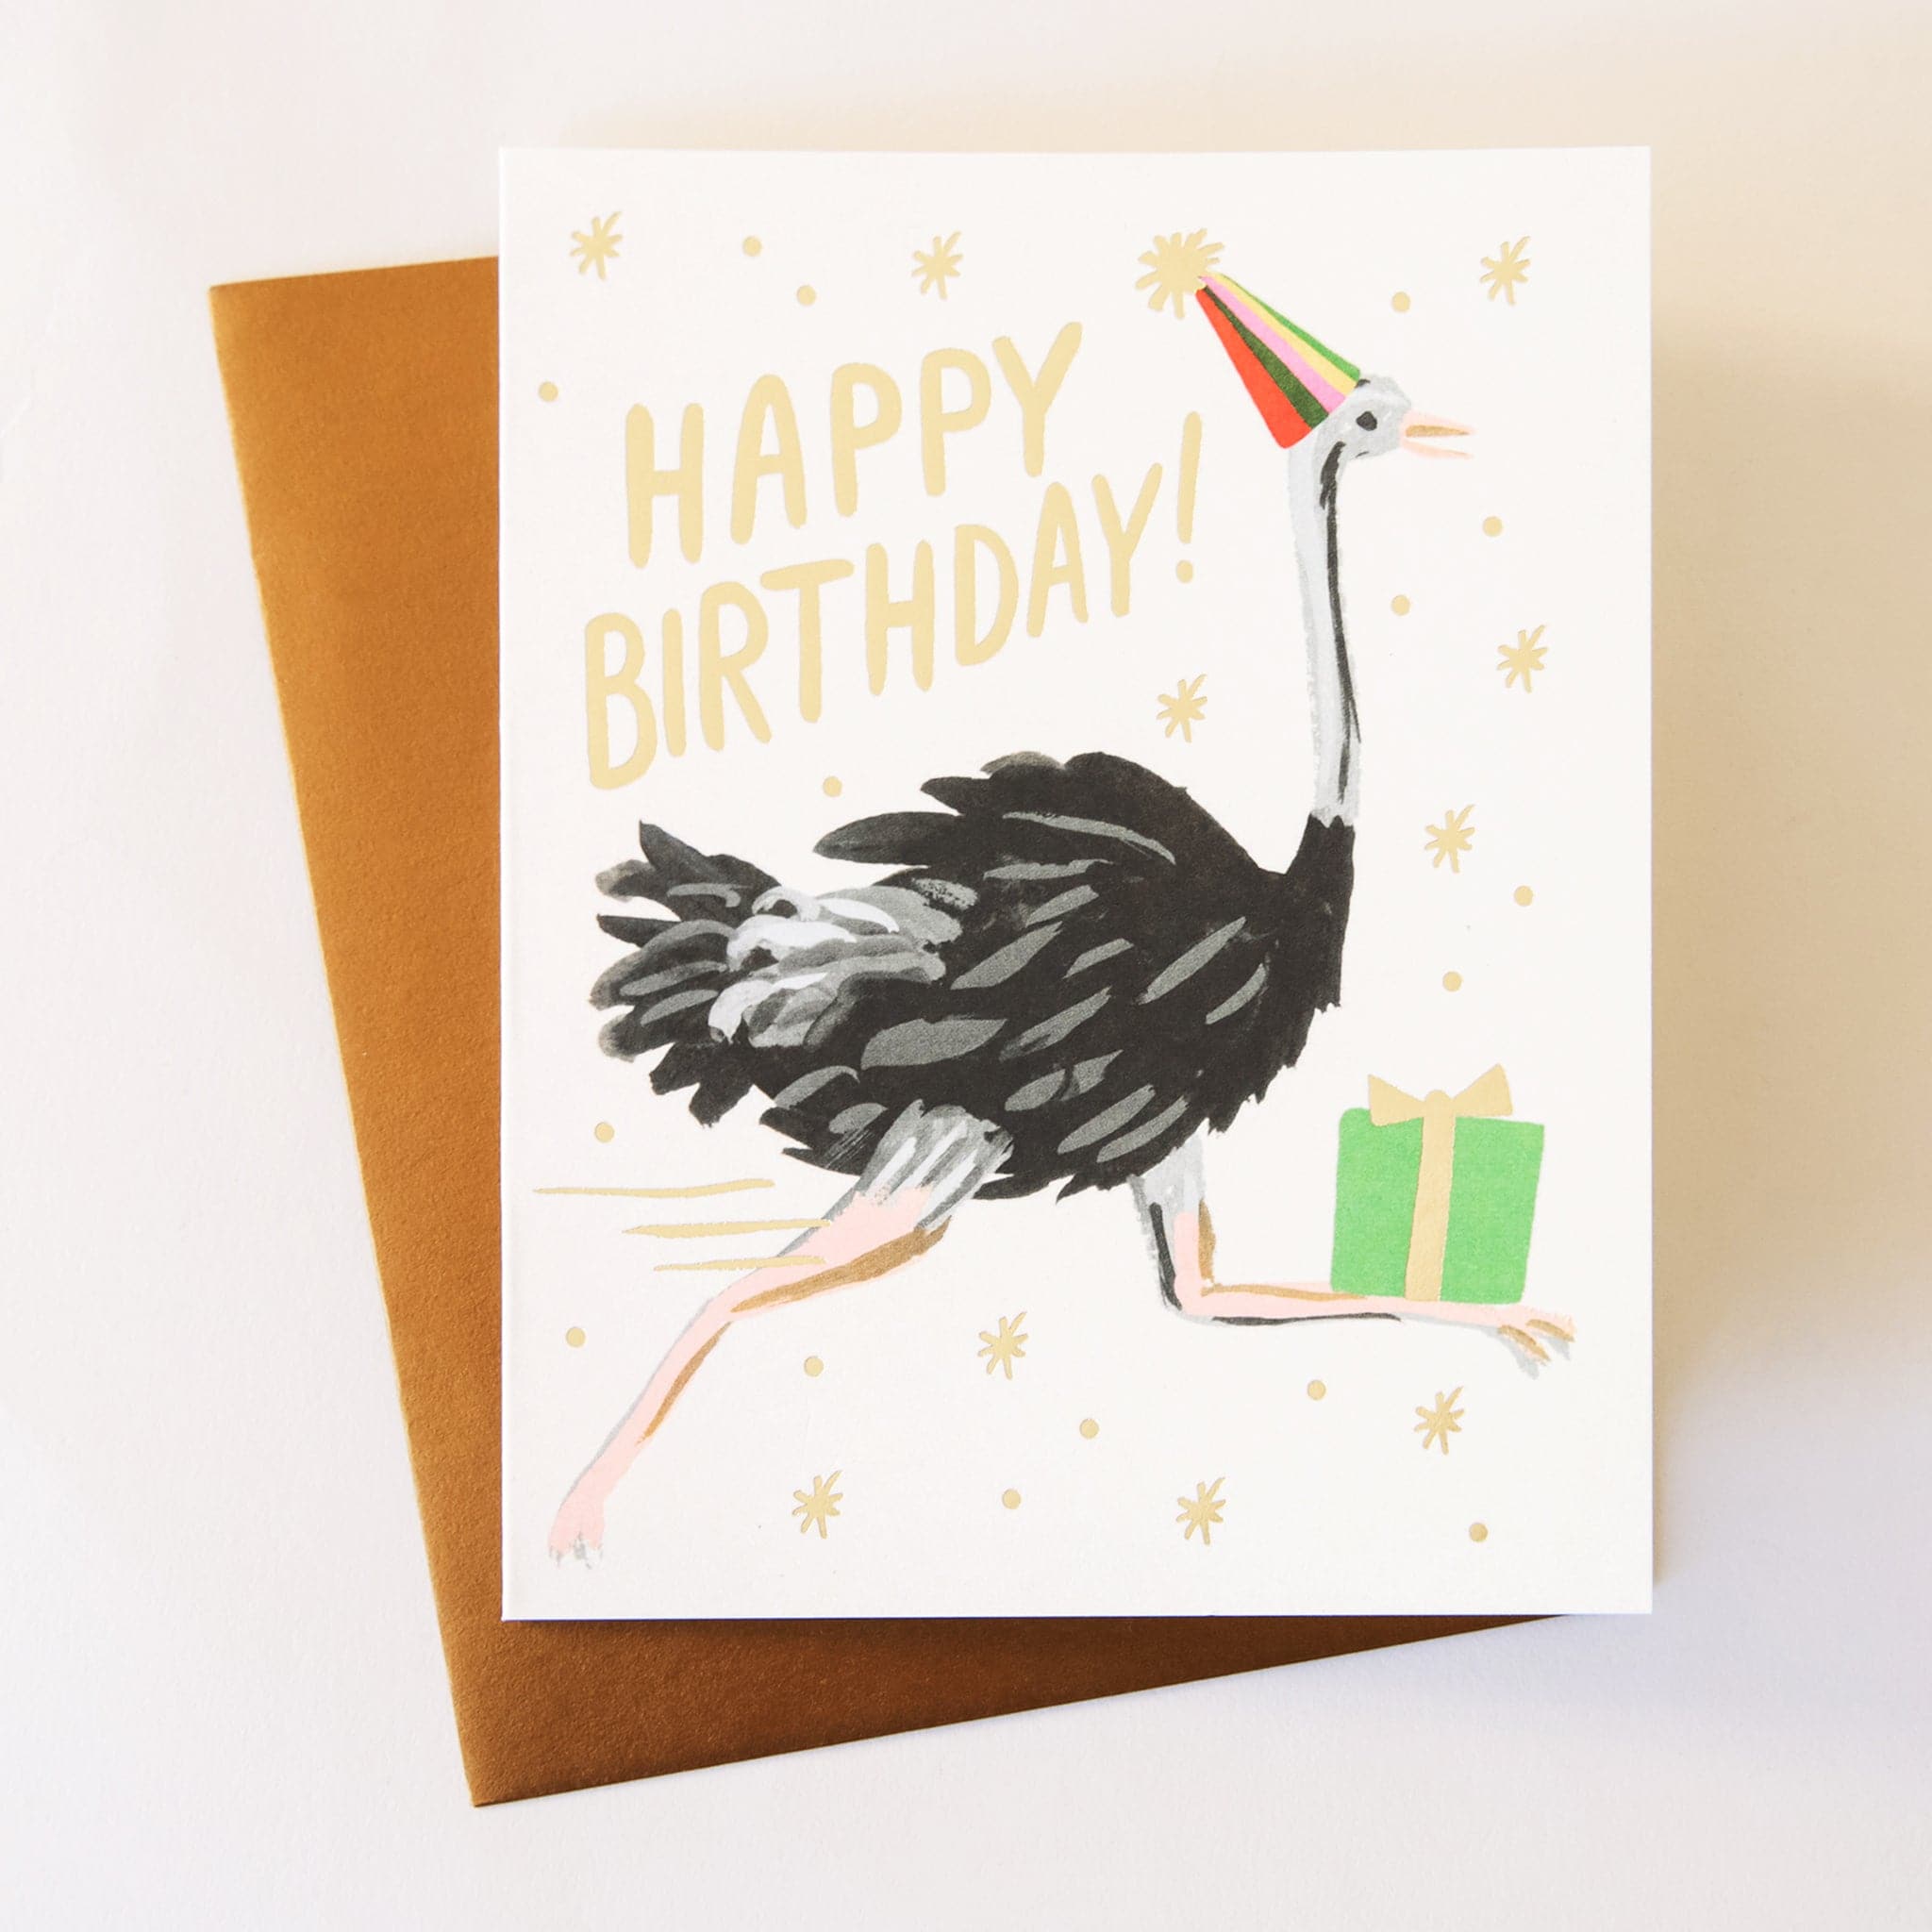 This adorable card has an ostrich running with a birthday present an a party hat. There is gold foil stars and lettering saying, "Happy Birthday!"